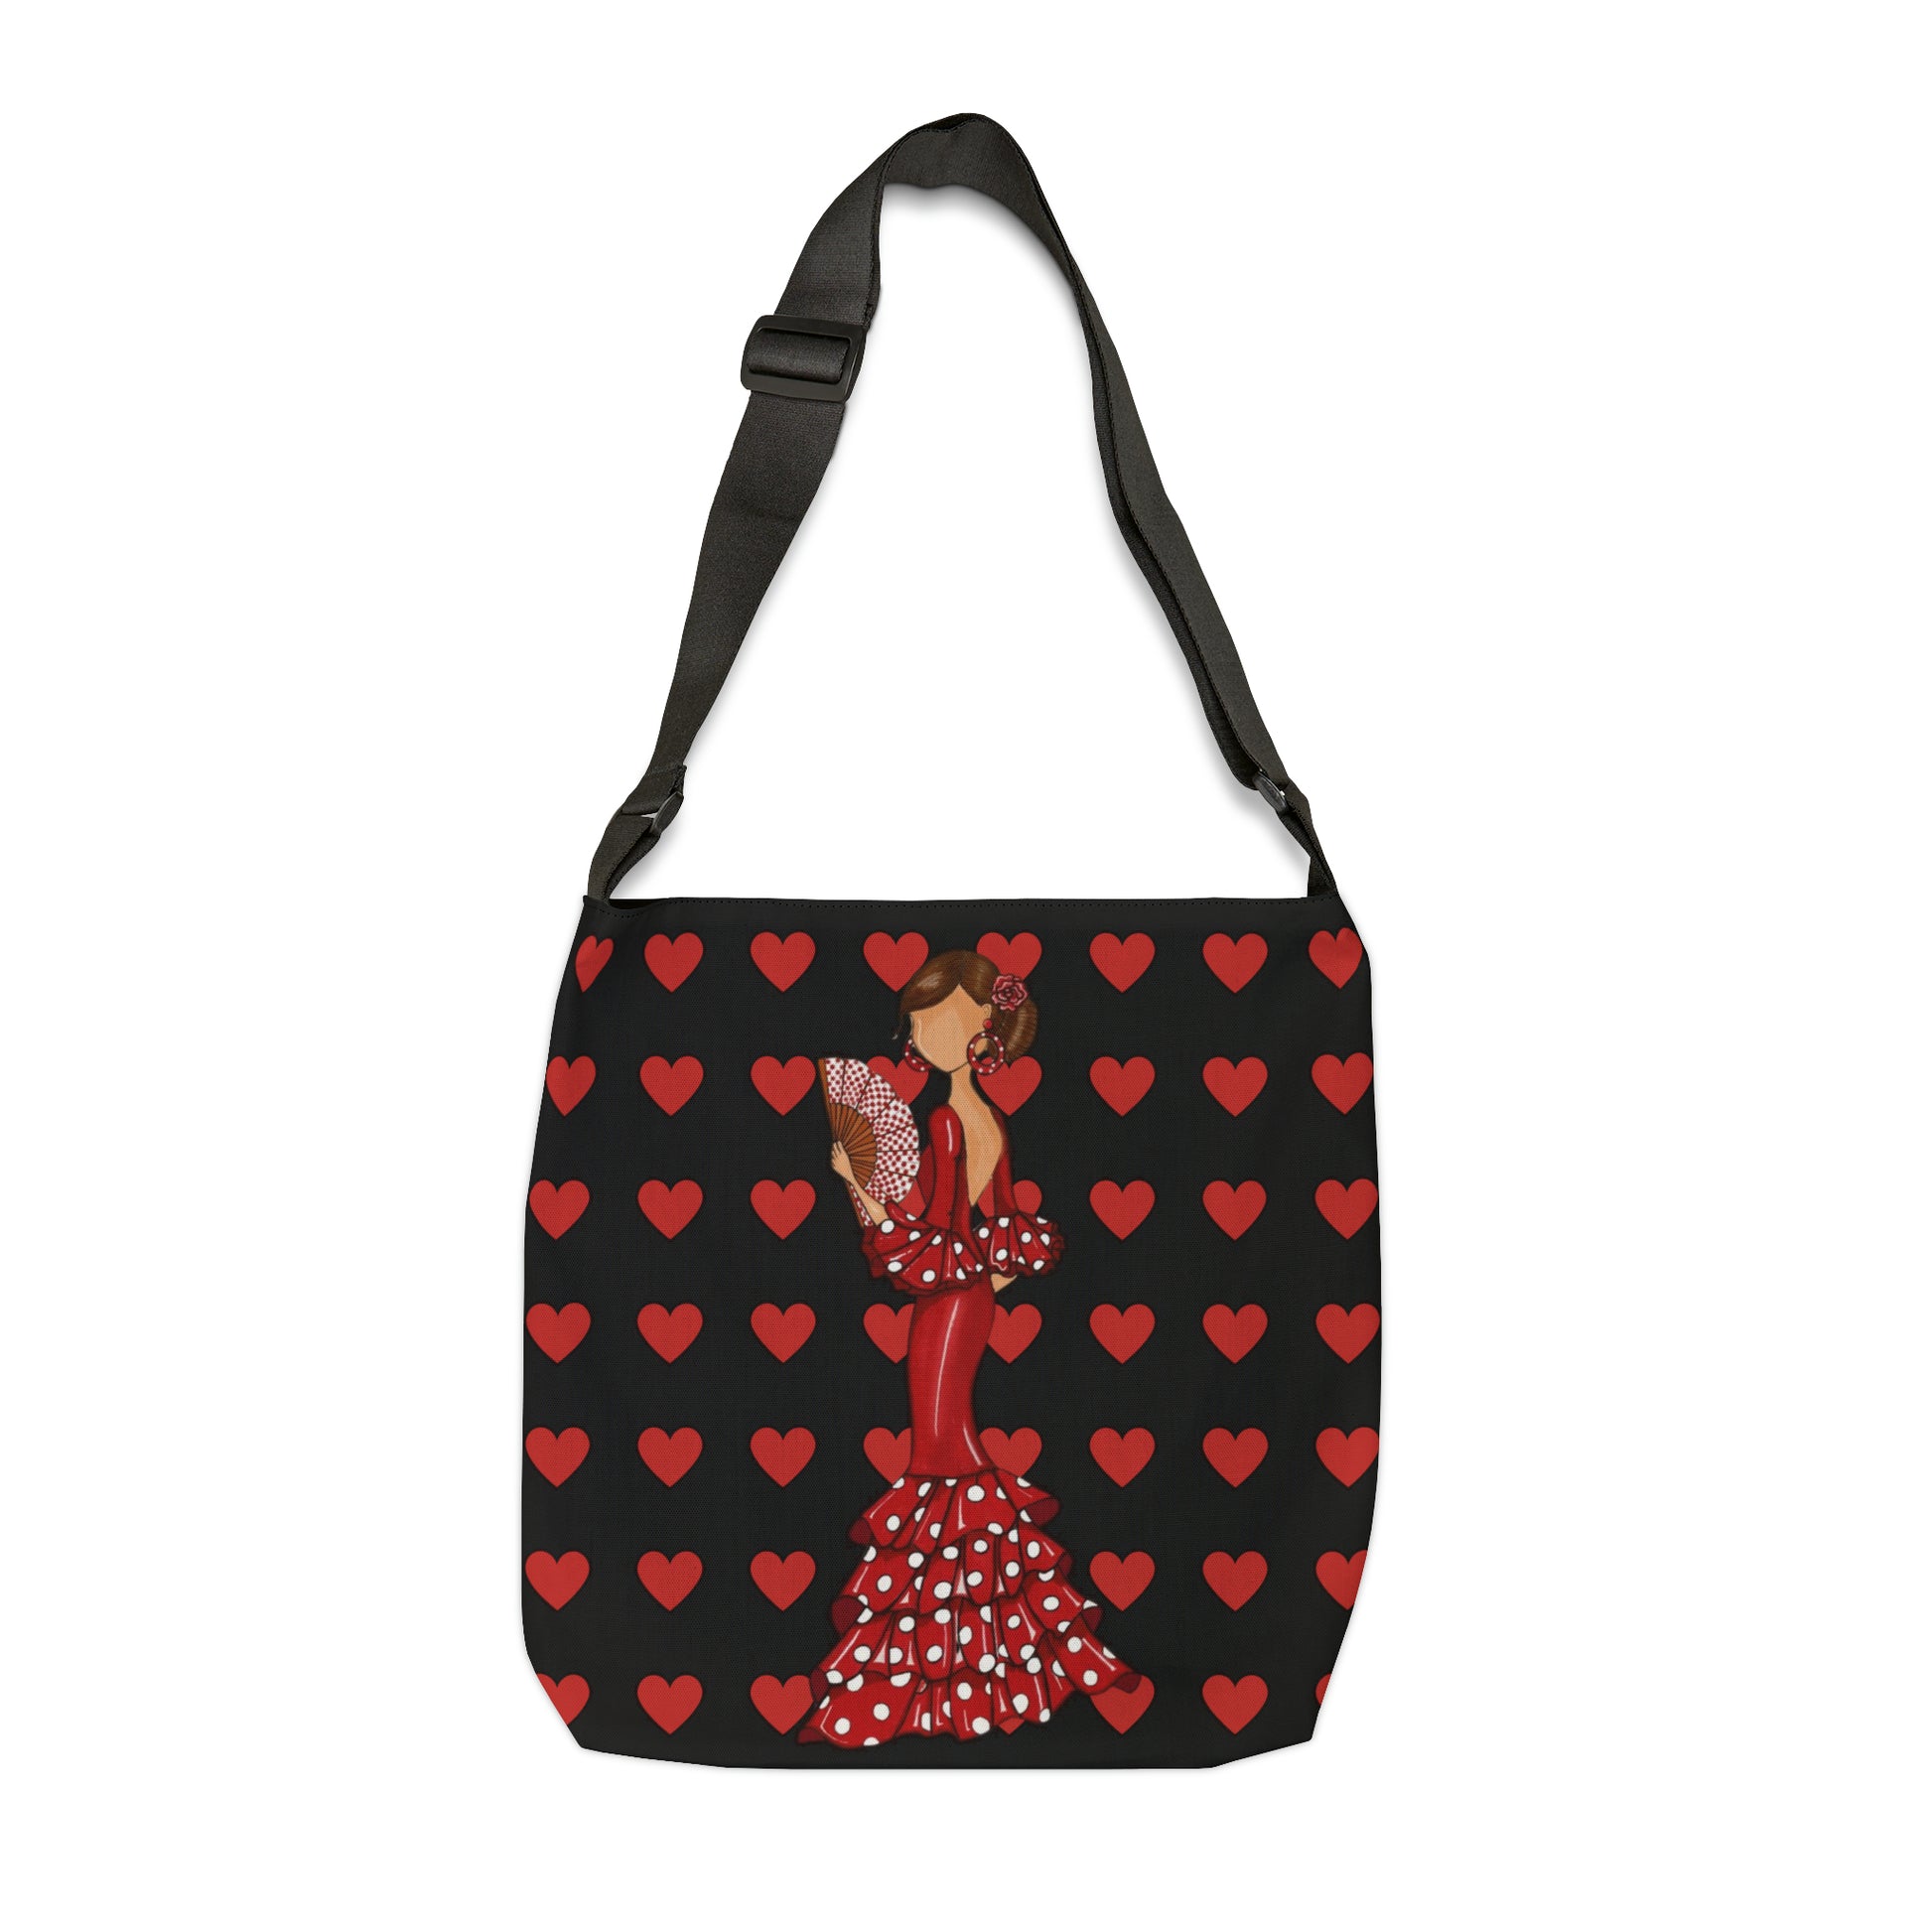 a red and black bag with a woman in a polka dot dress